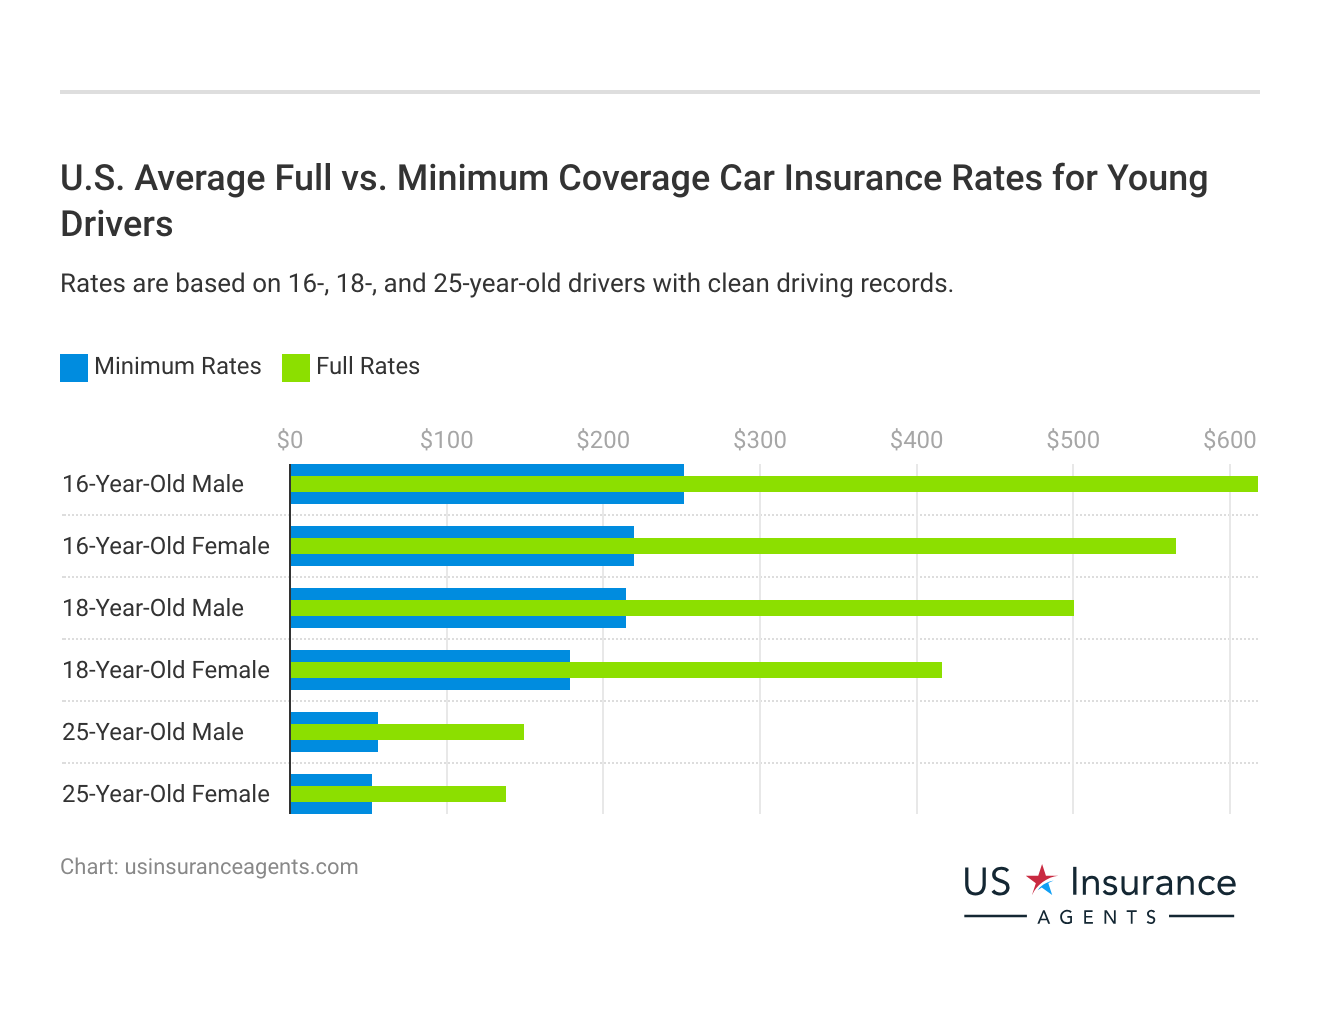 <h3>U.S. Average Full vs. Minimum Coverage Car Insurance Rates for Young Drivers</h3>